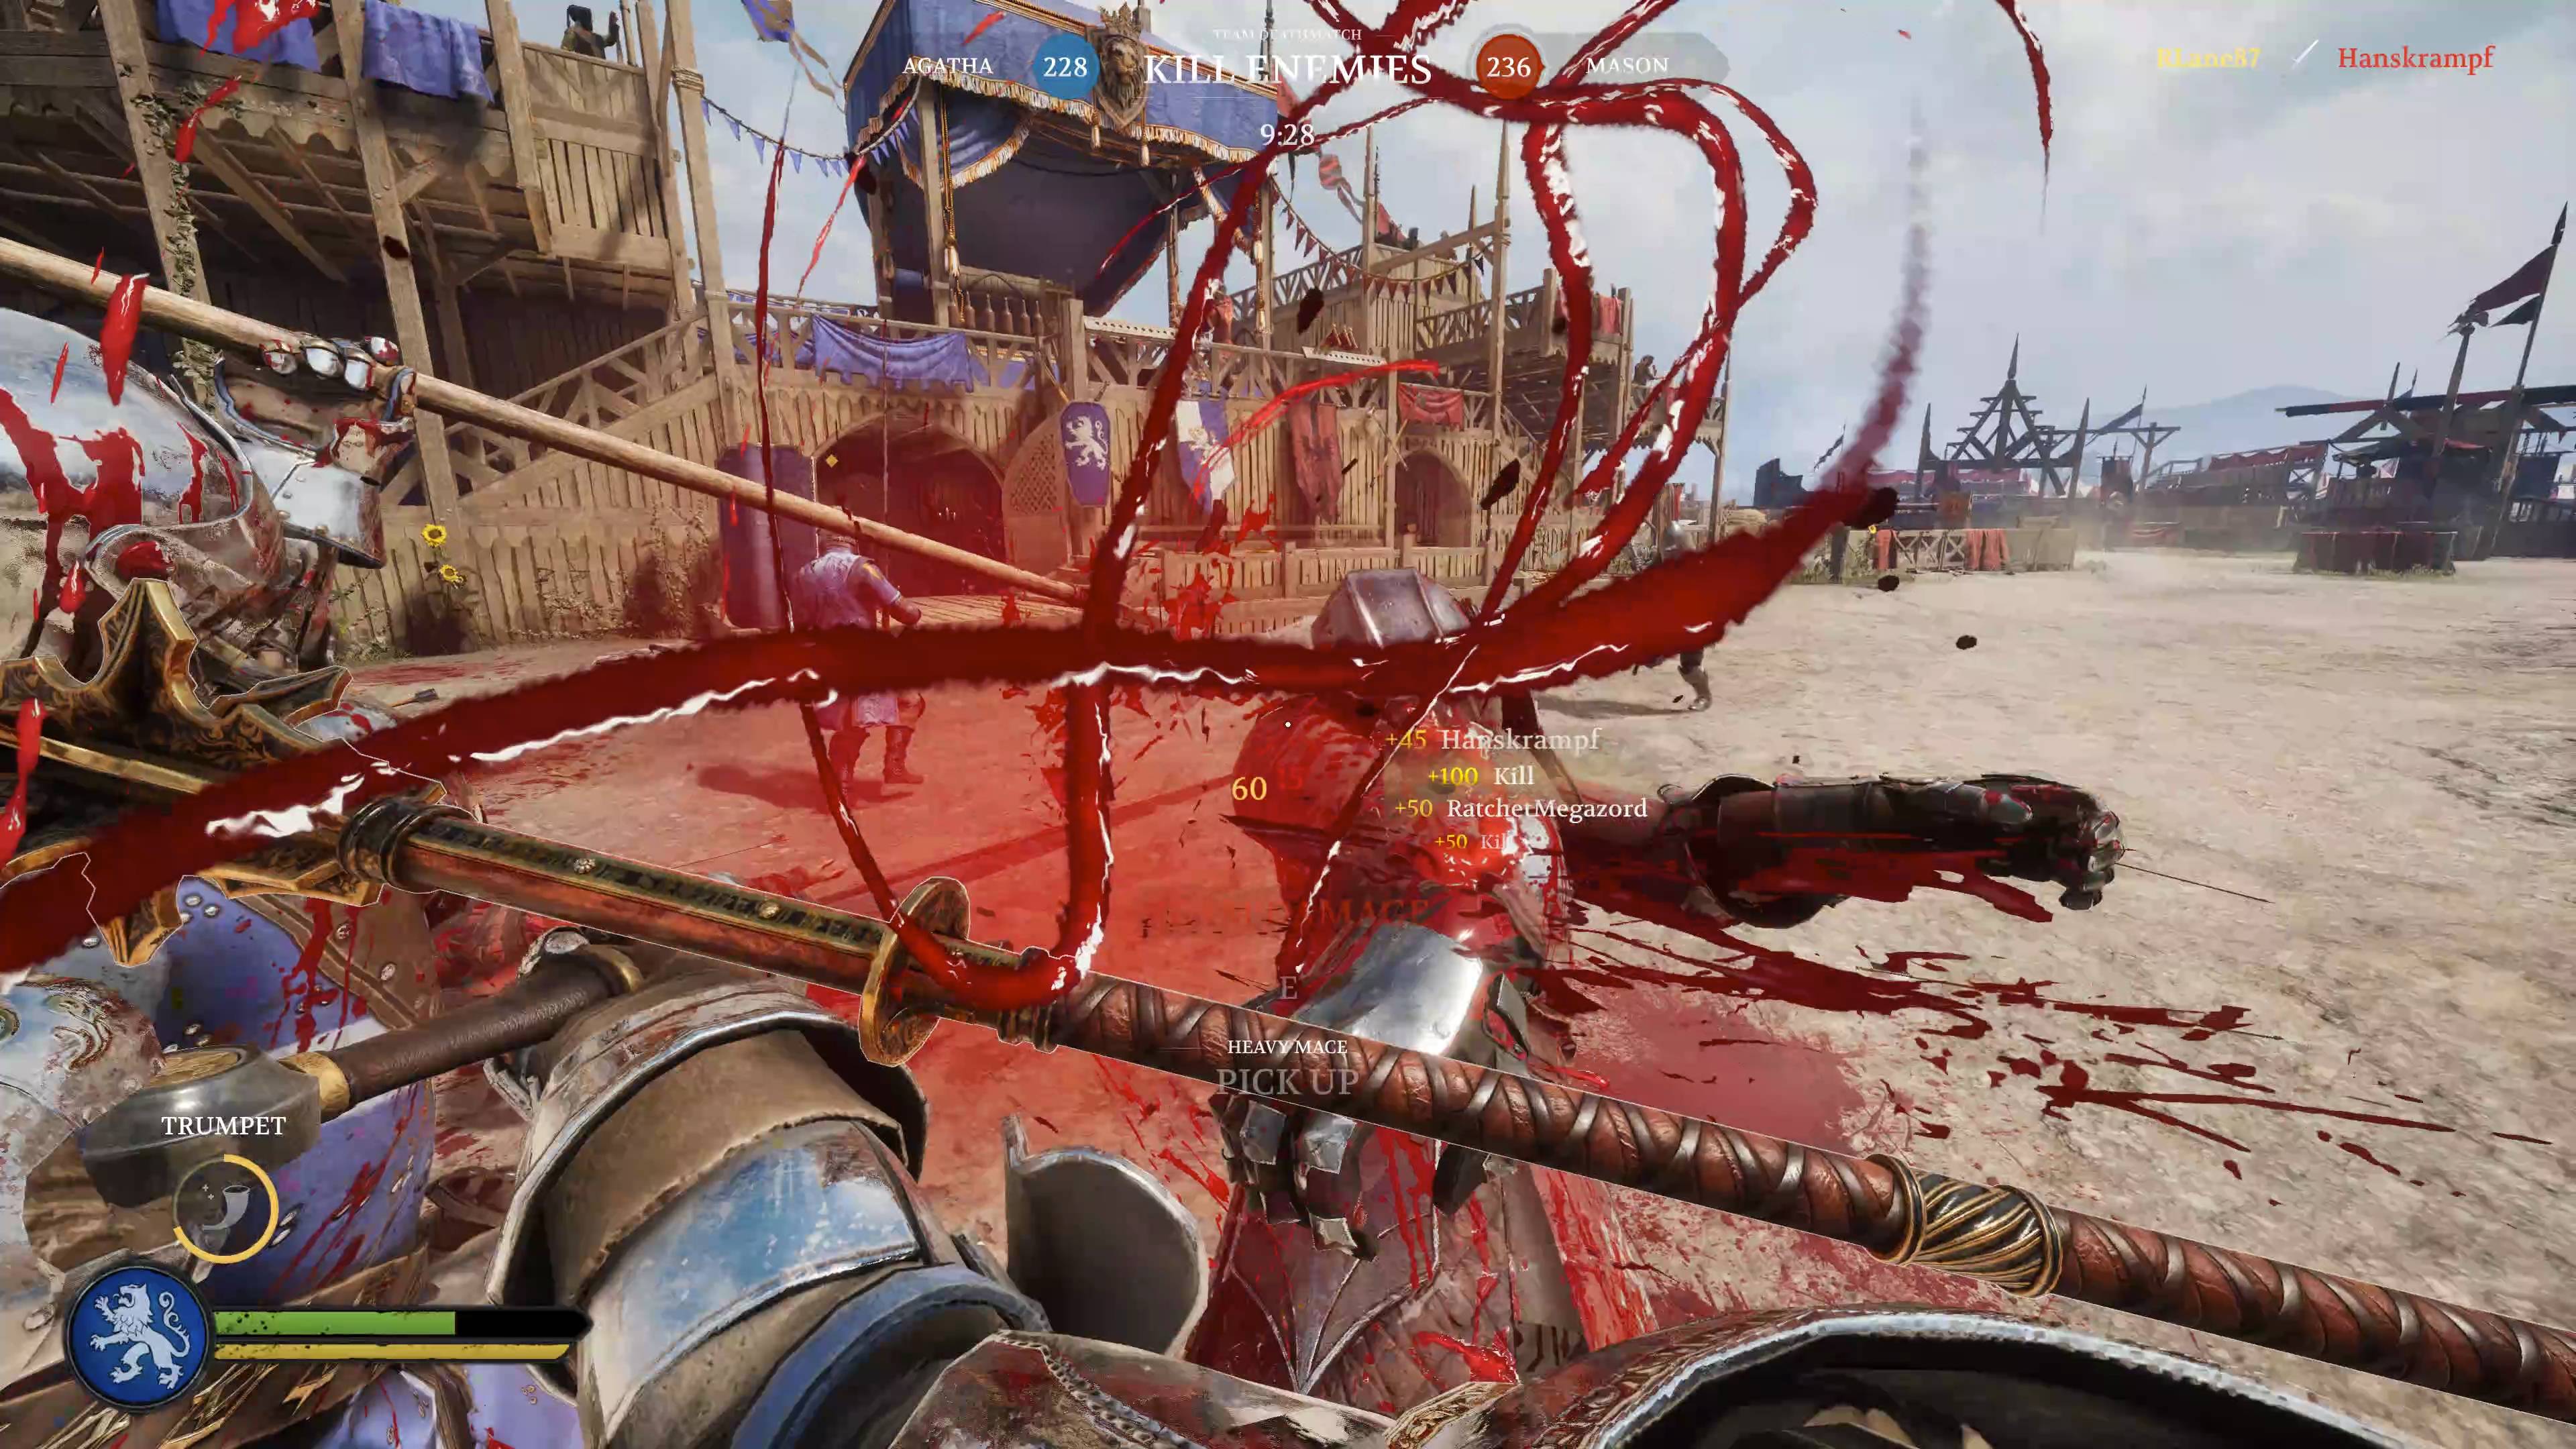 A knight suffers a major blow with a splatter of blood in Chivalry 2